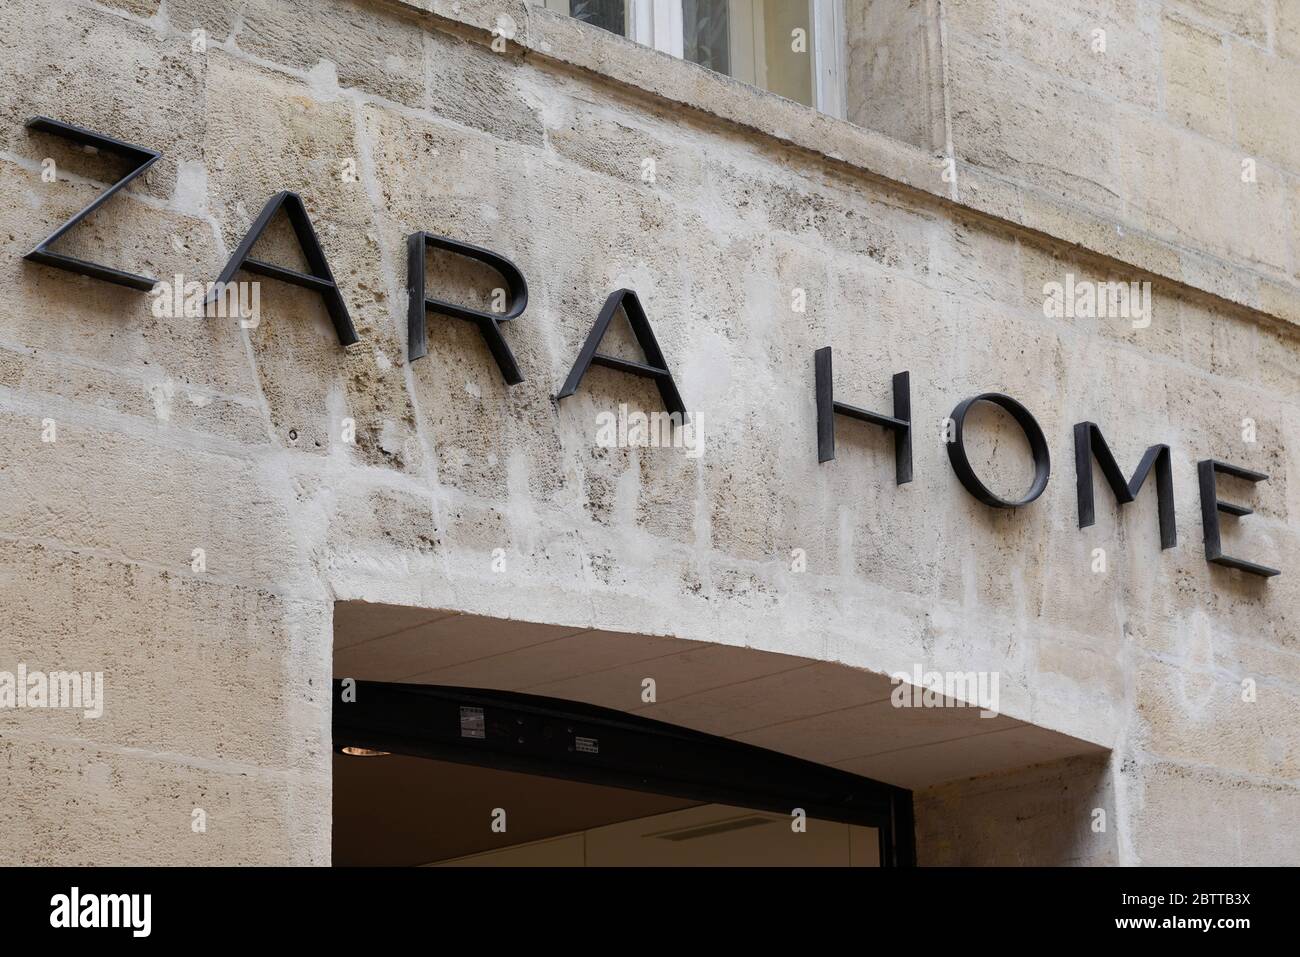 Bordeaux , Aquitaine / France - 05 05 2020 : zara home shop brand logo and  sign on wall store Stock Photo - Alamy